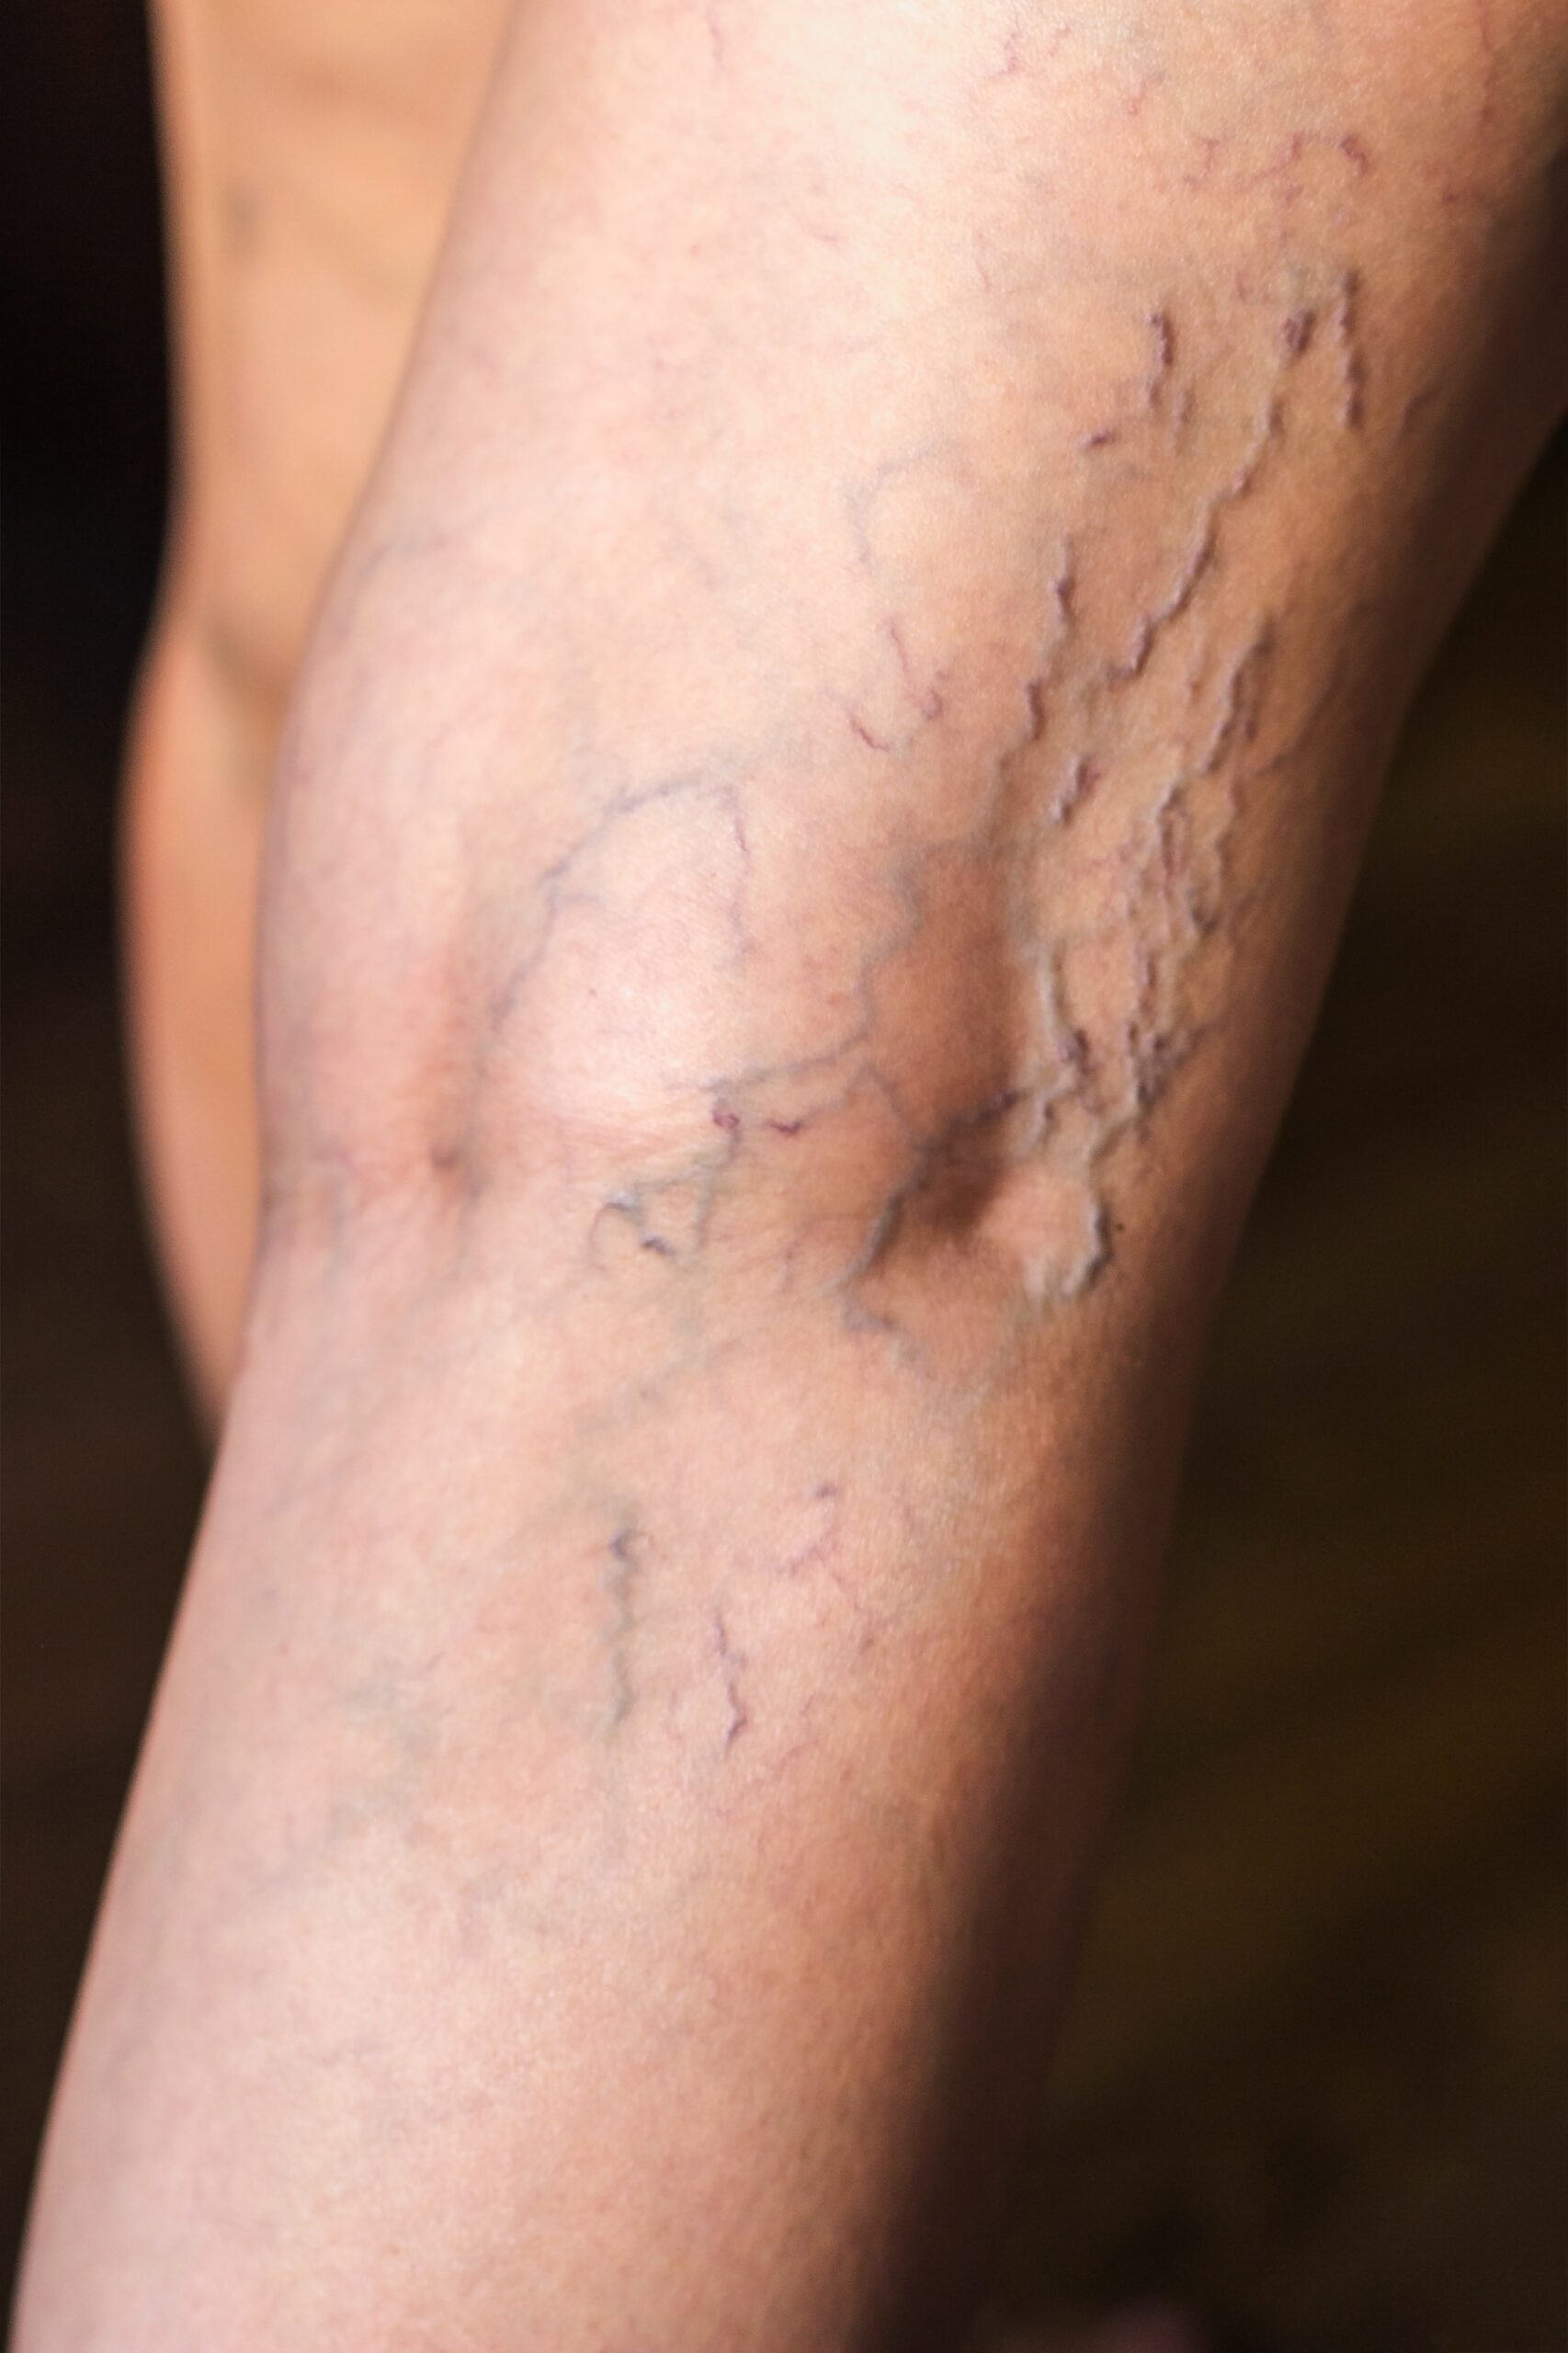 skin discoloration from vascular disease as spider veins and varicose veins